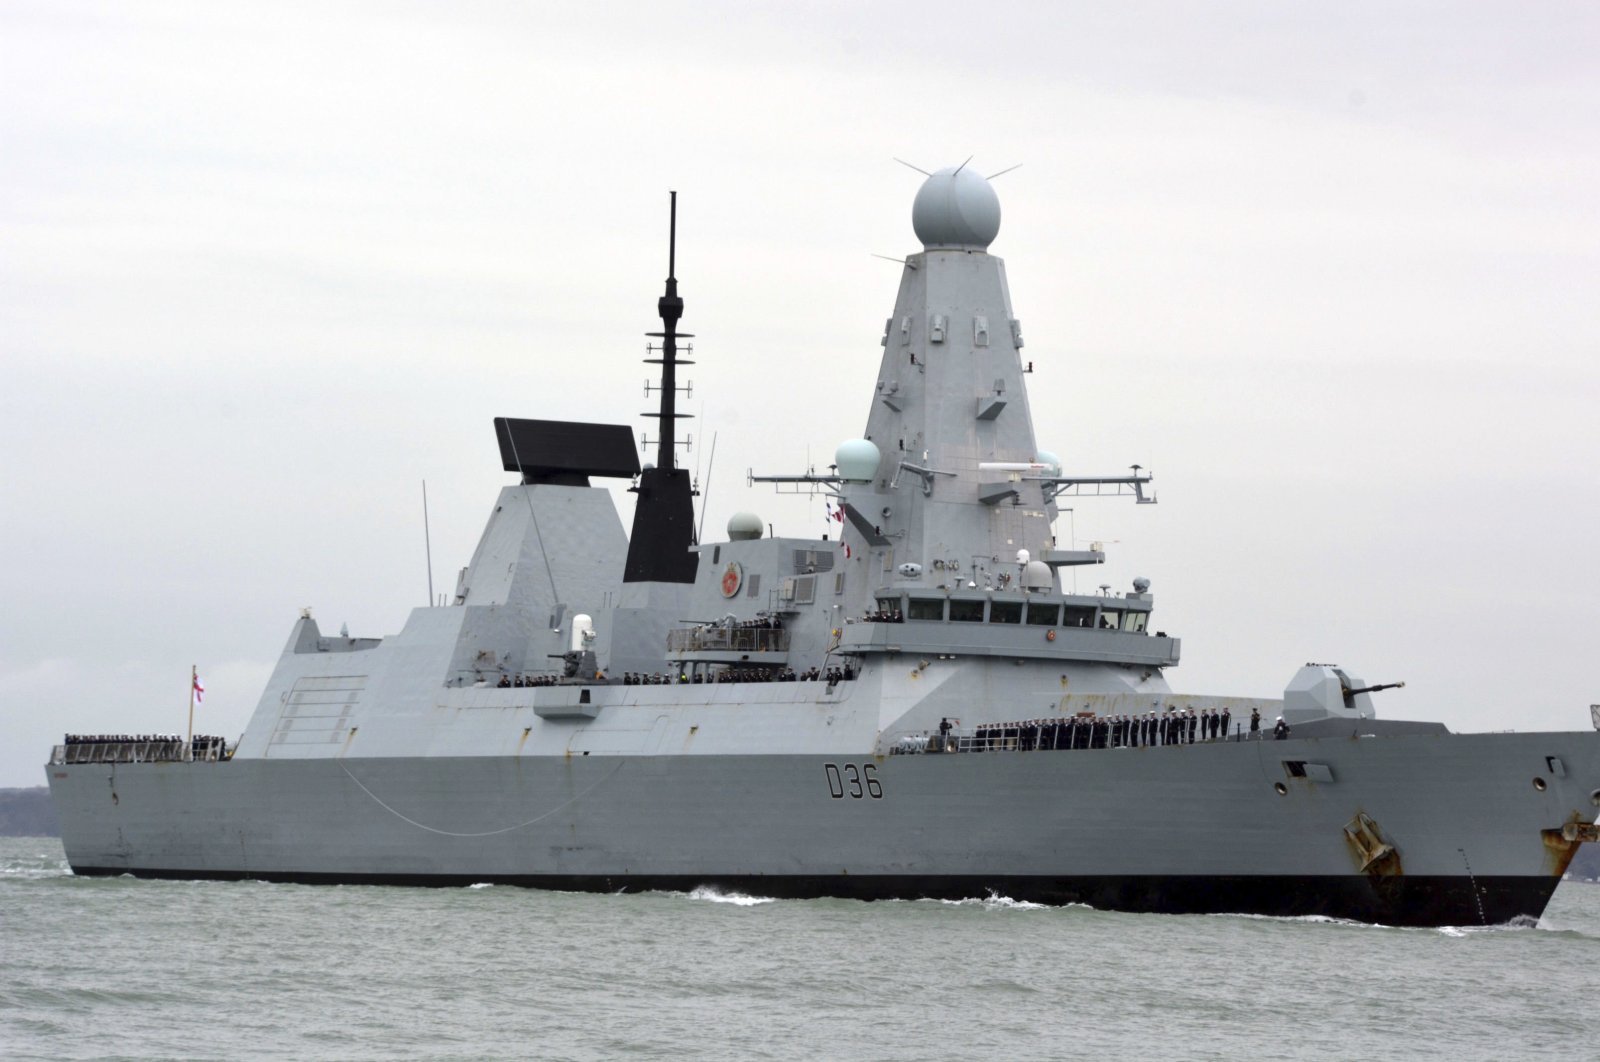 HMS Defender in Portsmouth, England, March 20, 2020. The Russian military said its warship had fired warning shots and a warplane dropped bombs to force the British destroyer from Russia's waters near Crimea in the Black Sea. (AP File Photo)